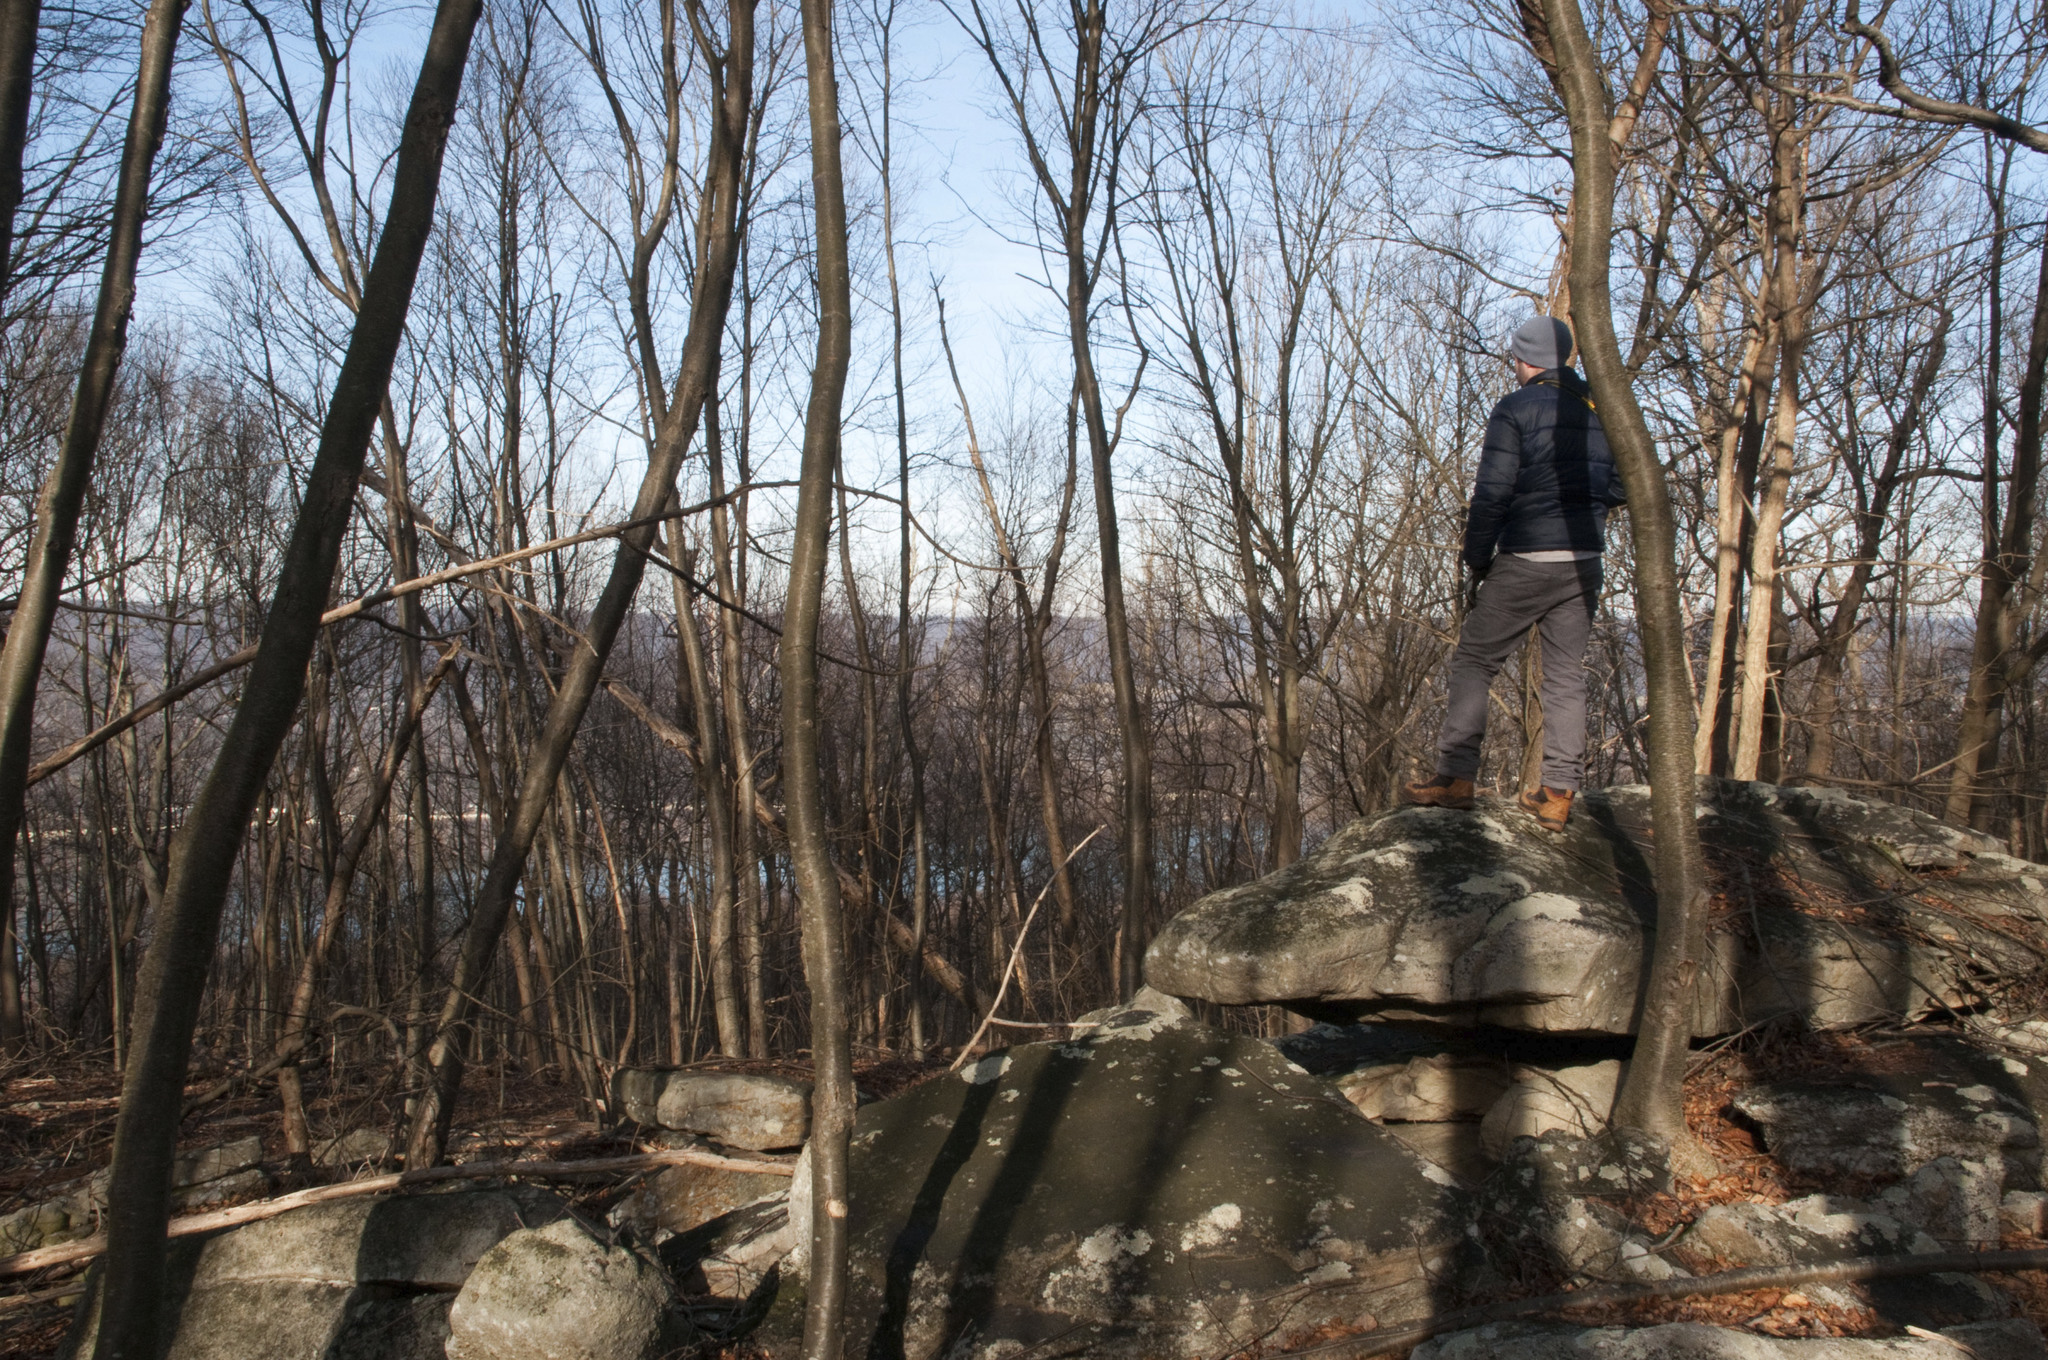 A person stands on a rock outcropping looking out at a valley landscape. Their view is obscured by a thick stand of trees.